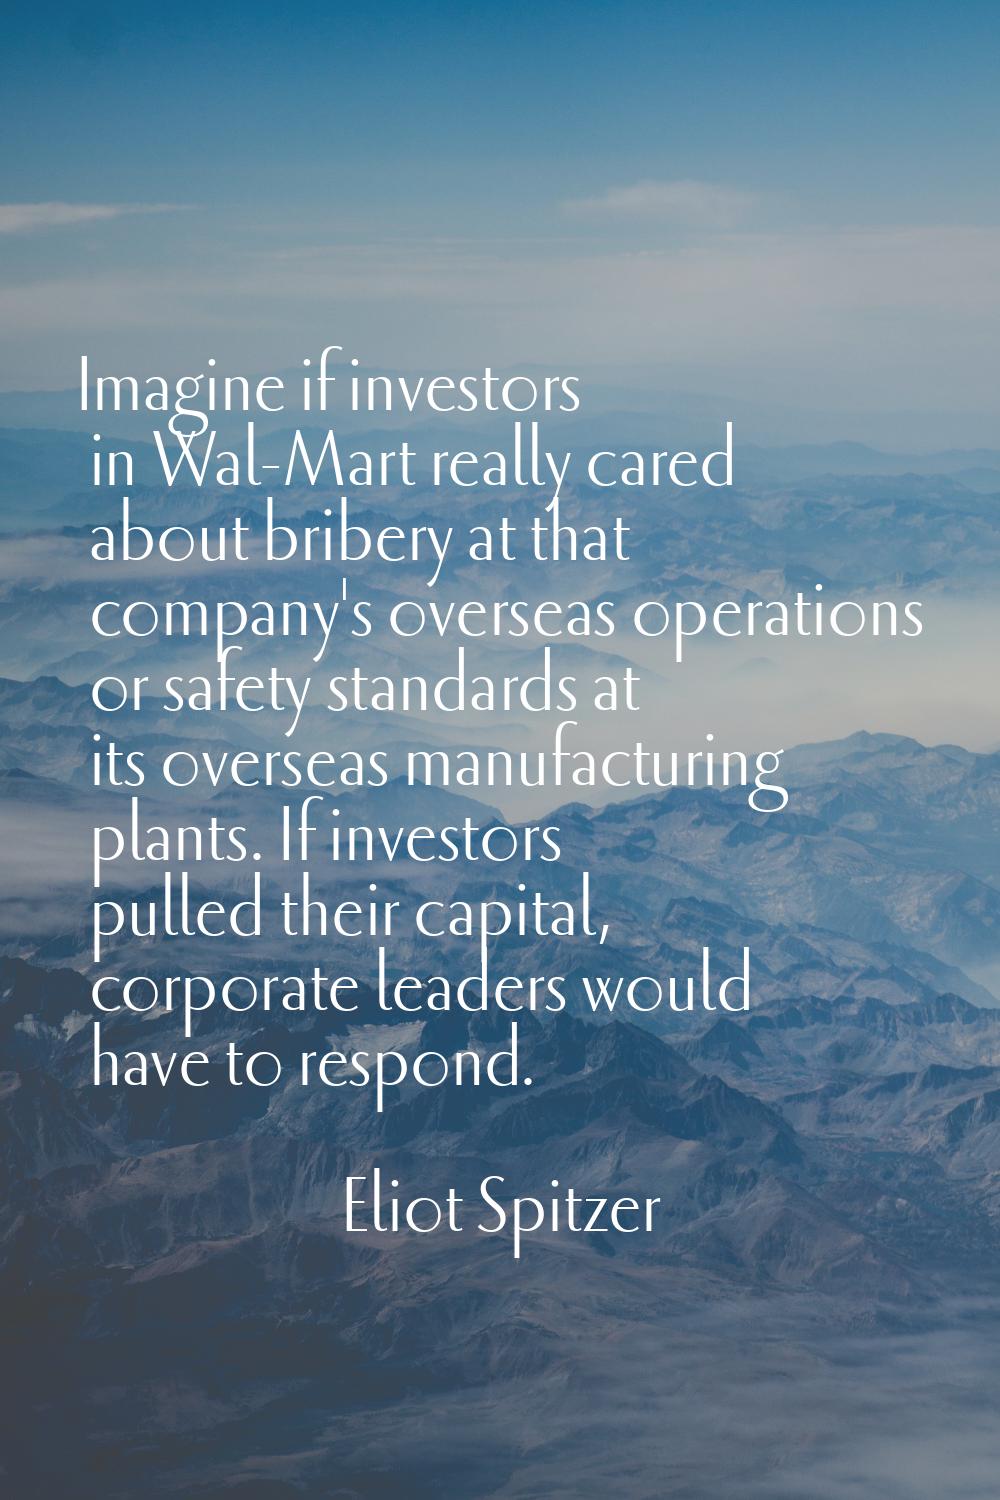 Imagine if investors in Wal-Mart really cared about bribery at that company's overseas operations o